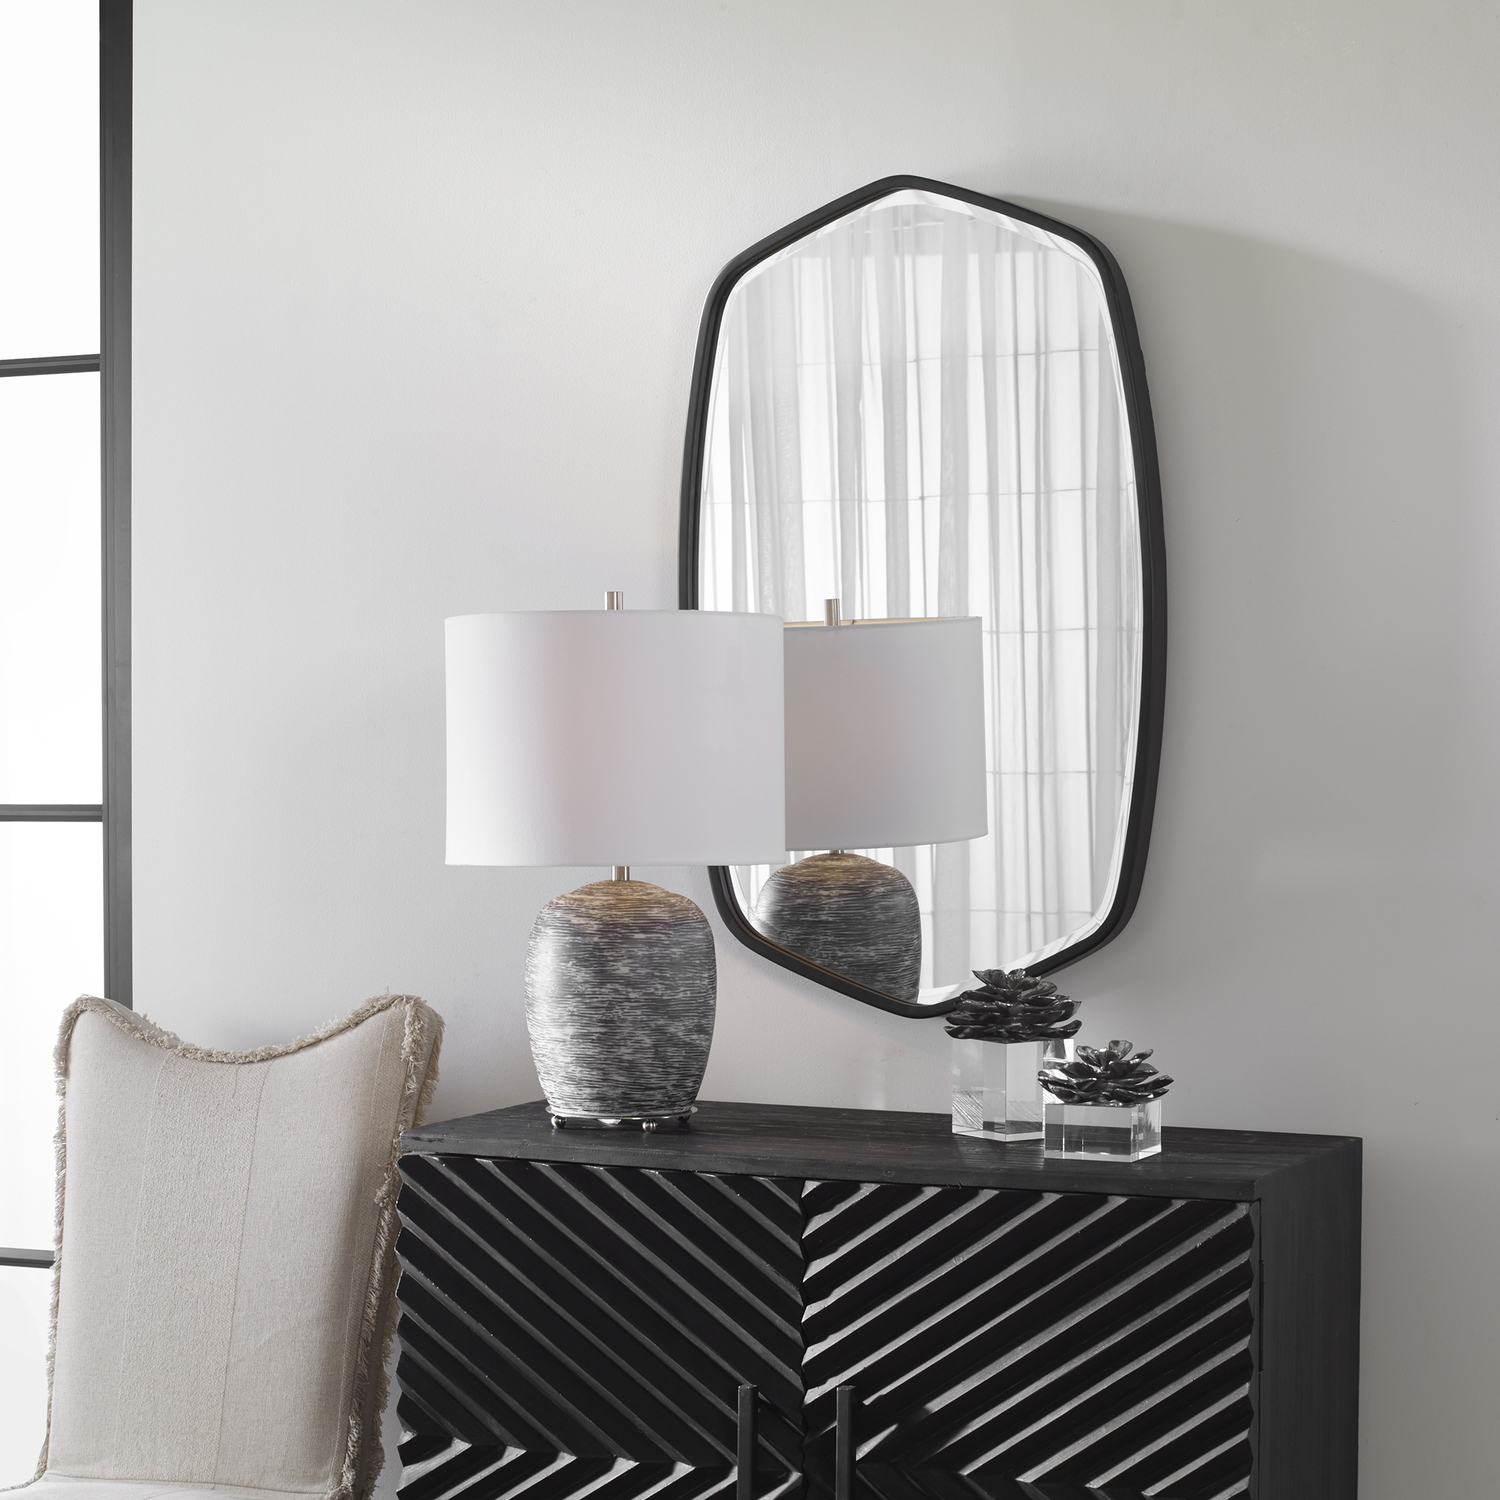 decorative mirror lights Uttermost Black Iron Mirror This Hand Forged Iron Mirror Frame Features A Unique Shape With Elegant Curves, Finished In A Streamlined Satin Black. Mirror Has A Generous 1 1/4" Bevel.